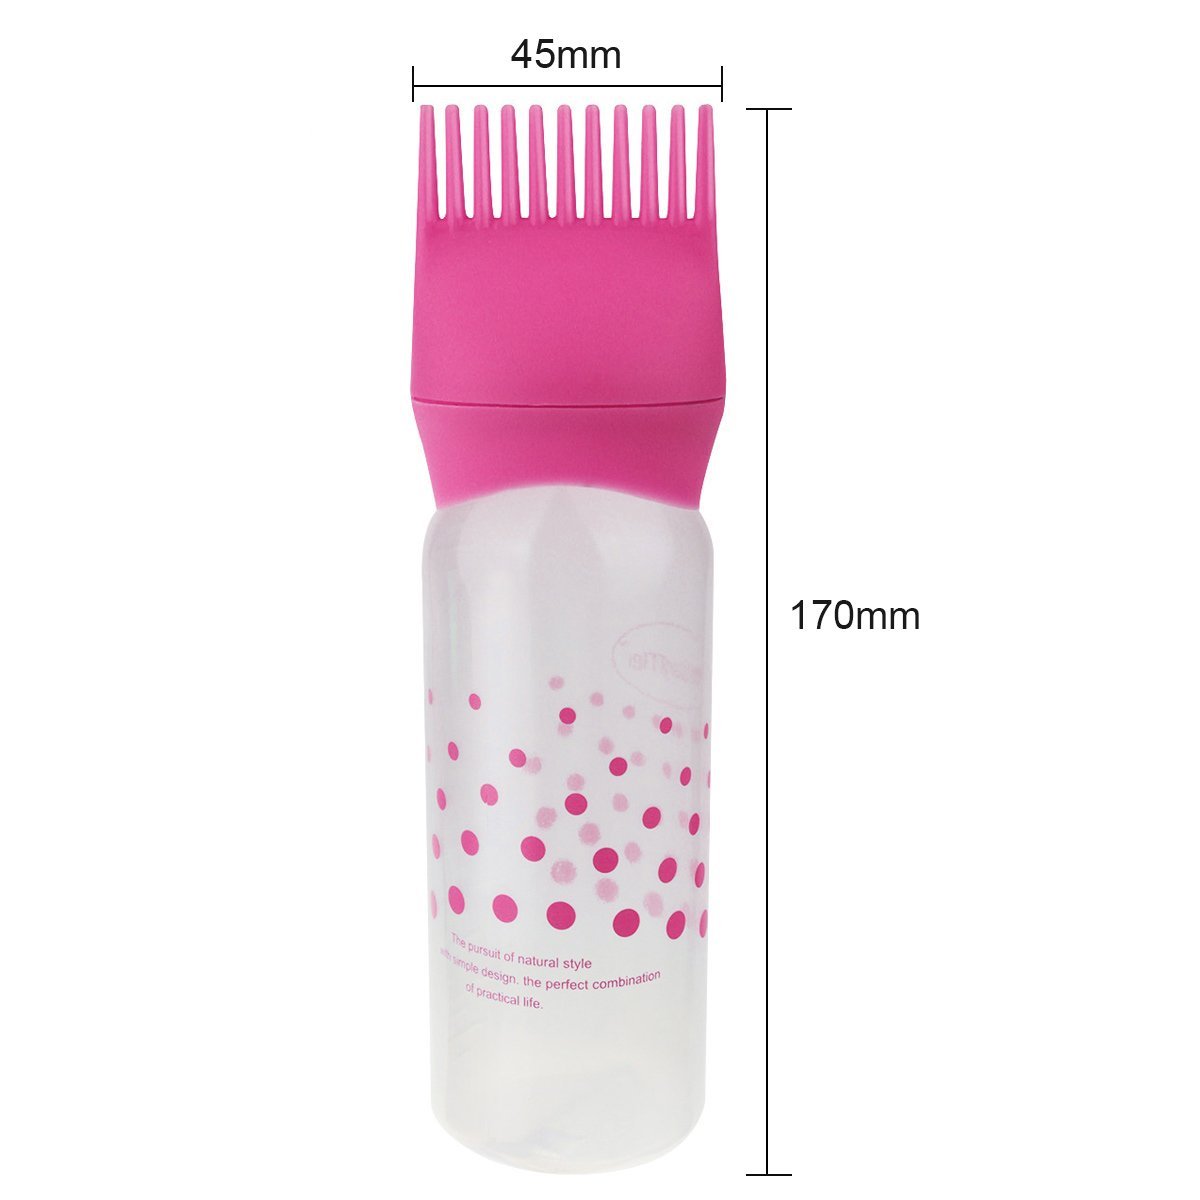 Conditioning Oil Root applicator Bottle - SashBeauty